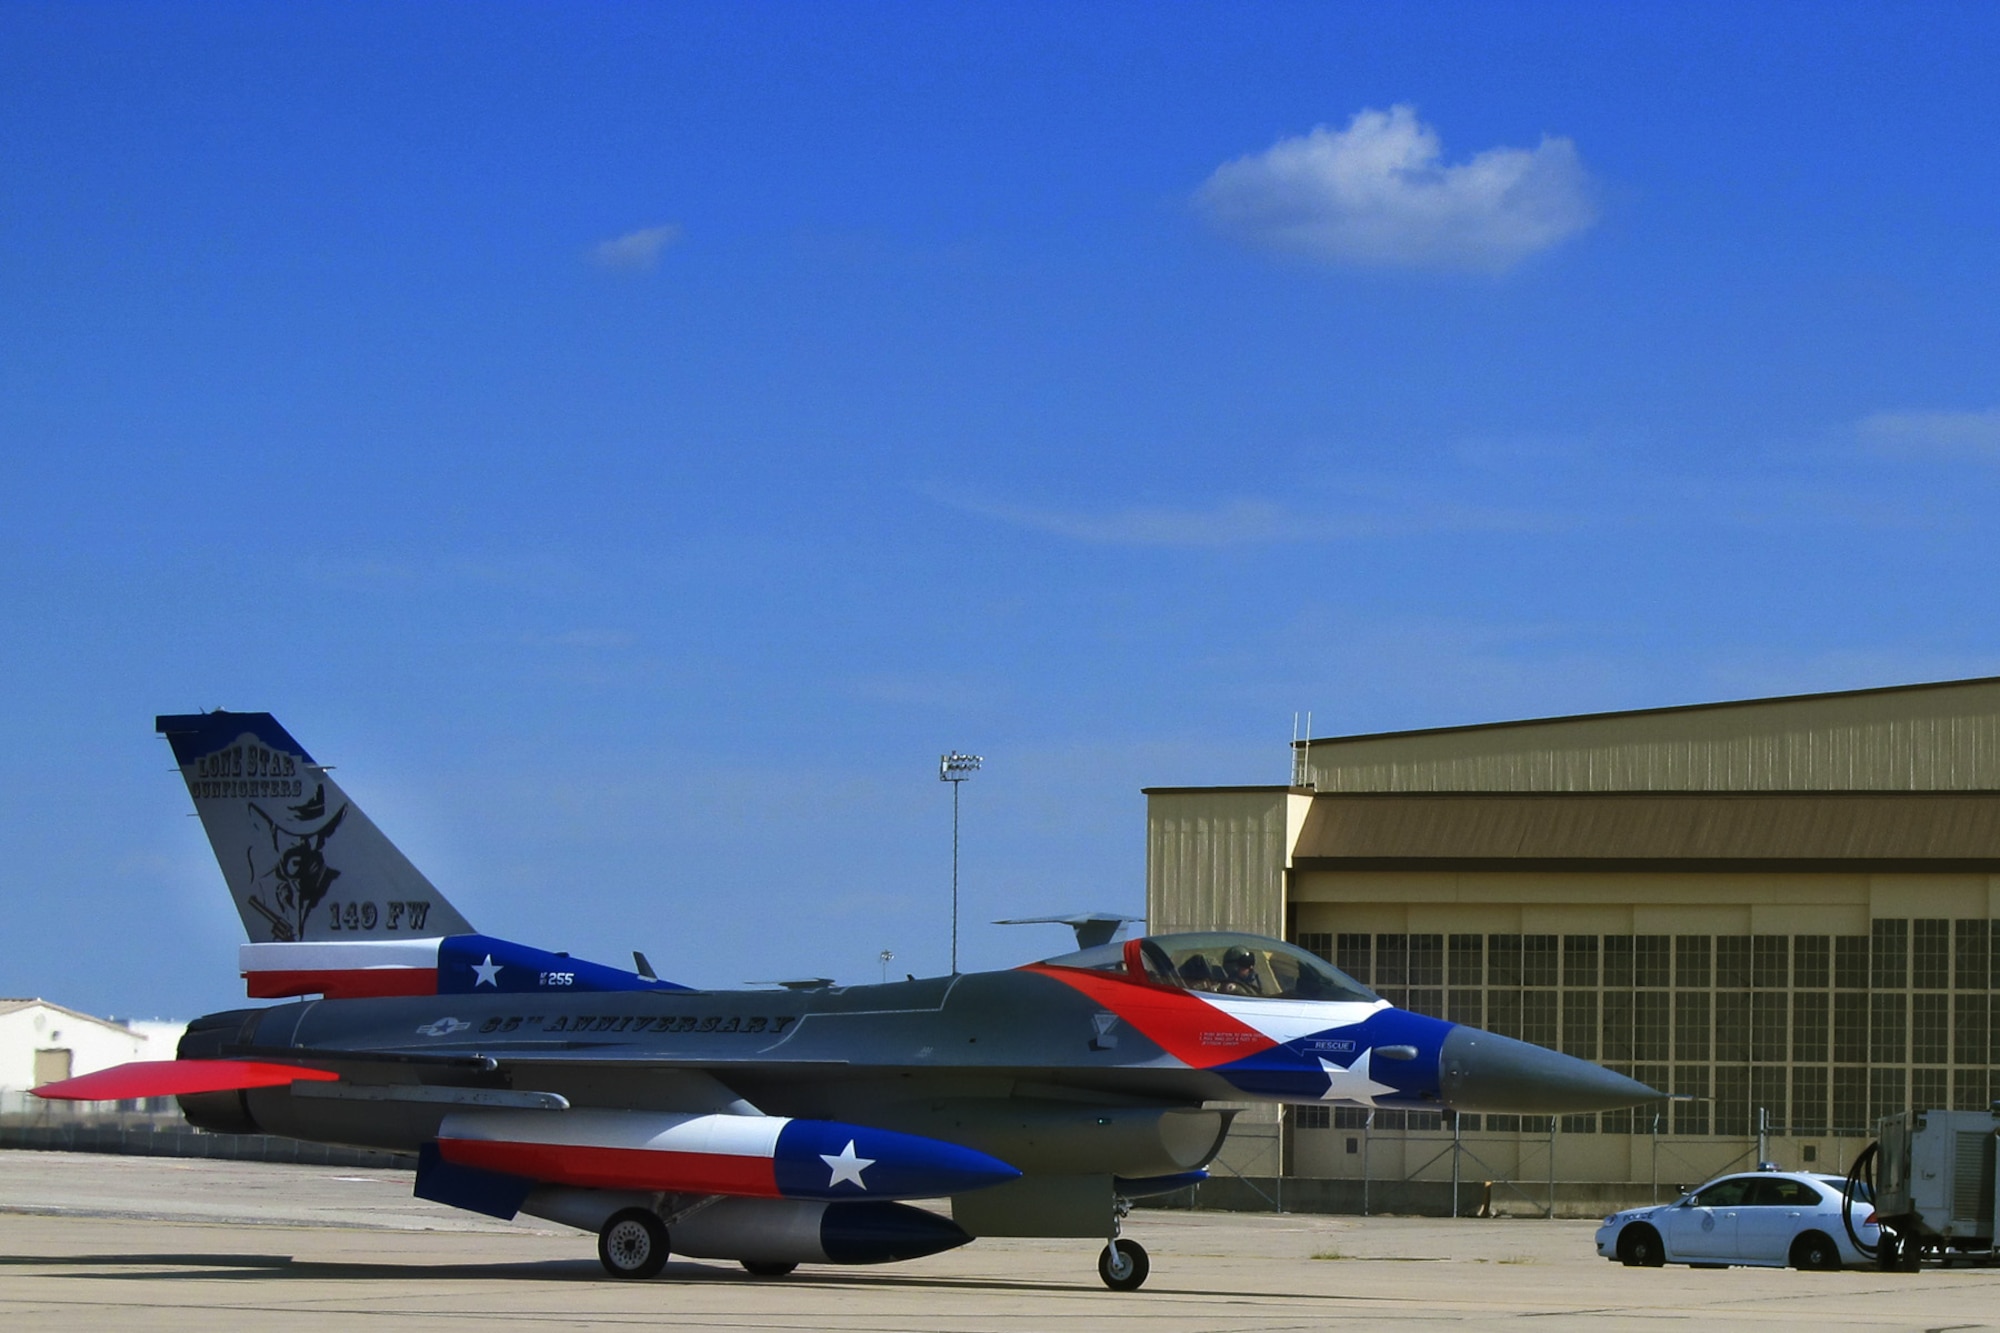 The Texas Air National Guard's 149th Fighter Wing's flagship F-16 returning to Lackland Air Force Base after being painted to honor the 65th anniversary of the unit's affiliation with the Air National Guard, Sept. 29, 2011. (Air National Guard photo by Staff Sgt. Phil Fountain/Released)